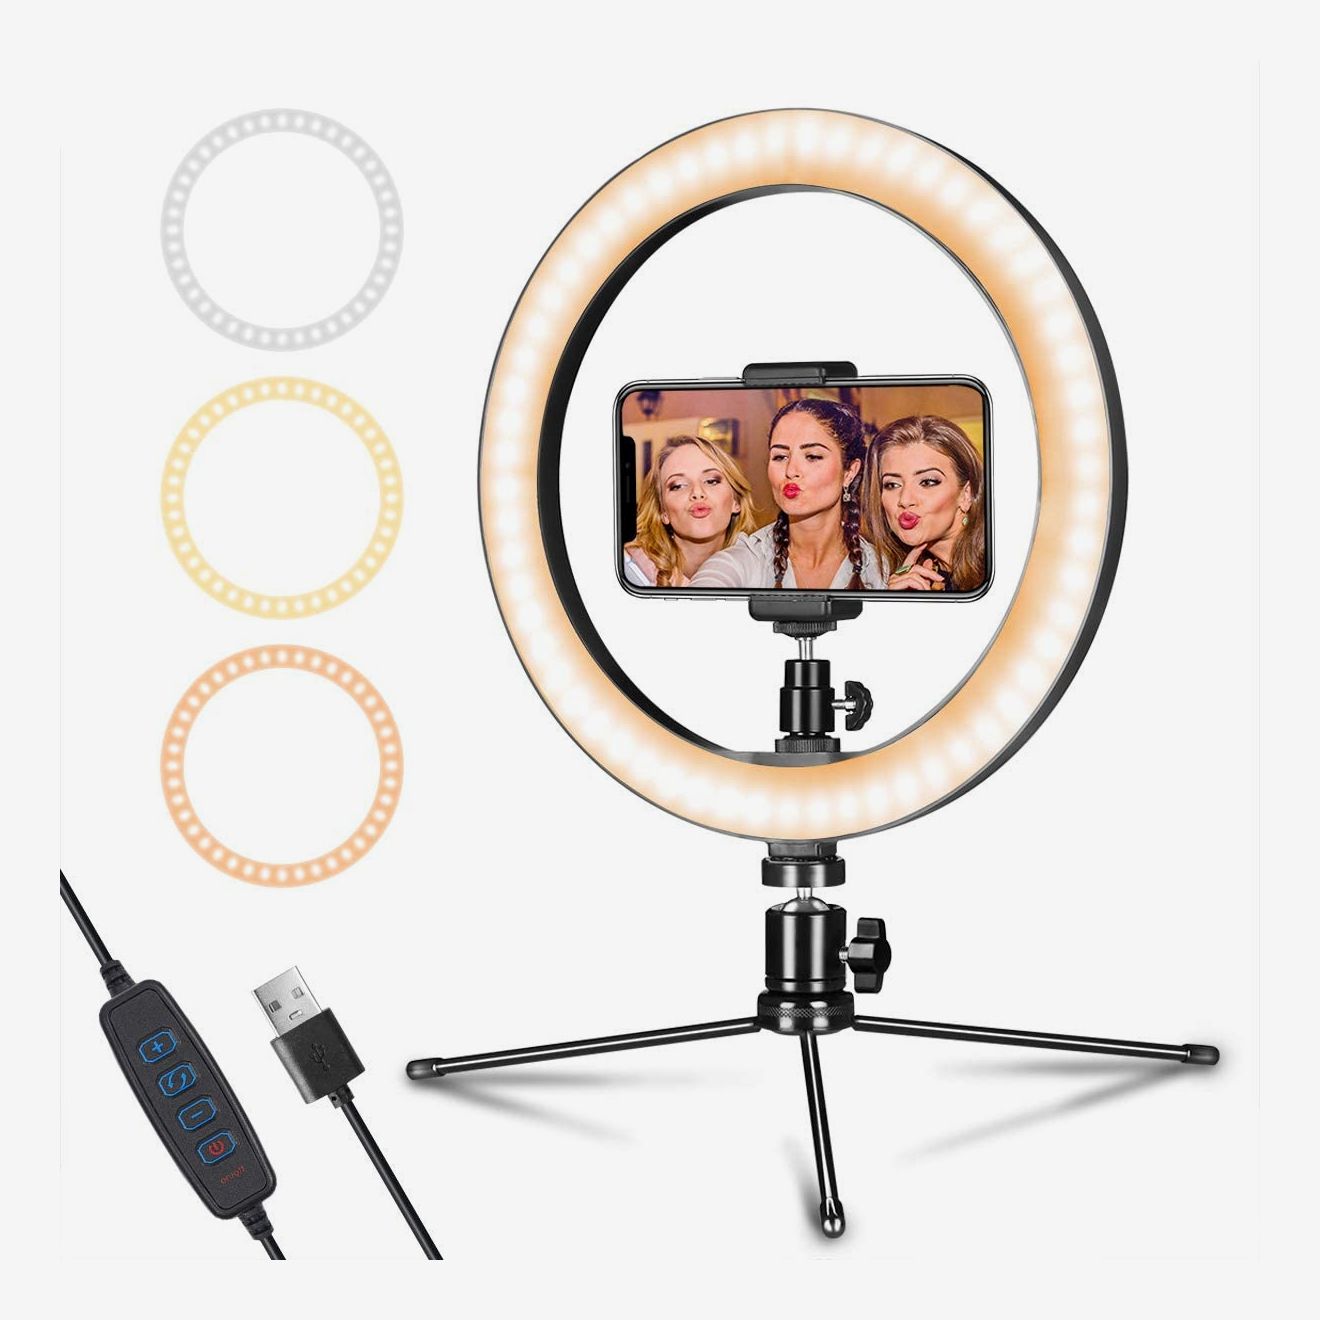 Live Streaming USB Lamp Ring Light with Clip for Remote Working Distance Learning 360 Rotatable Video Light PeoTRIOL Video Conference Lighting Zoom Call Lighting or Computer Laptop Video Meeting 